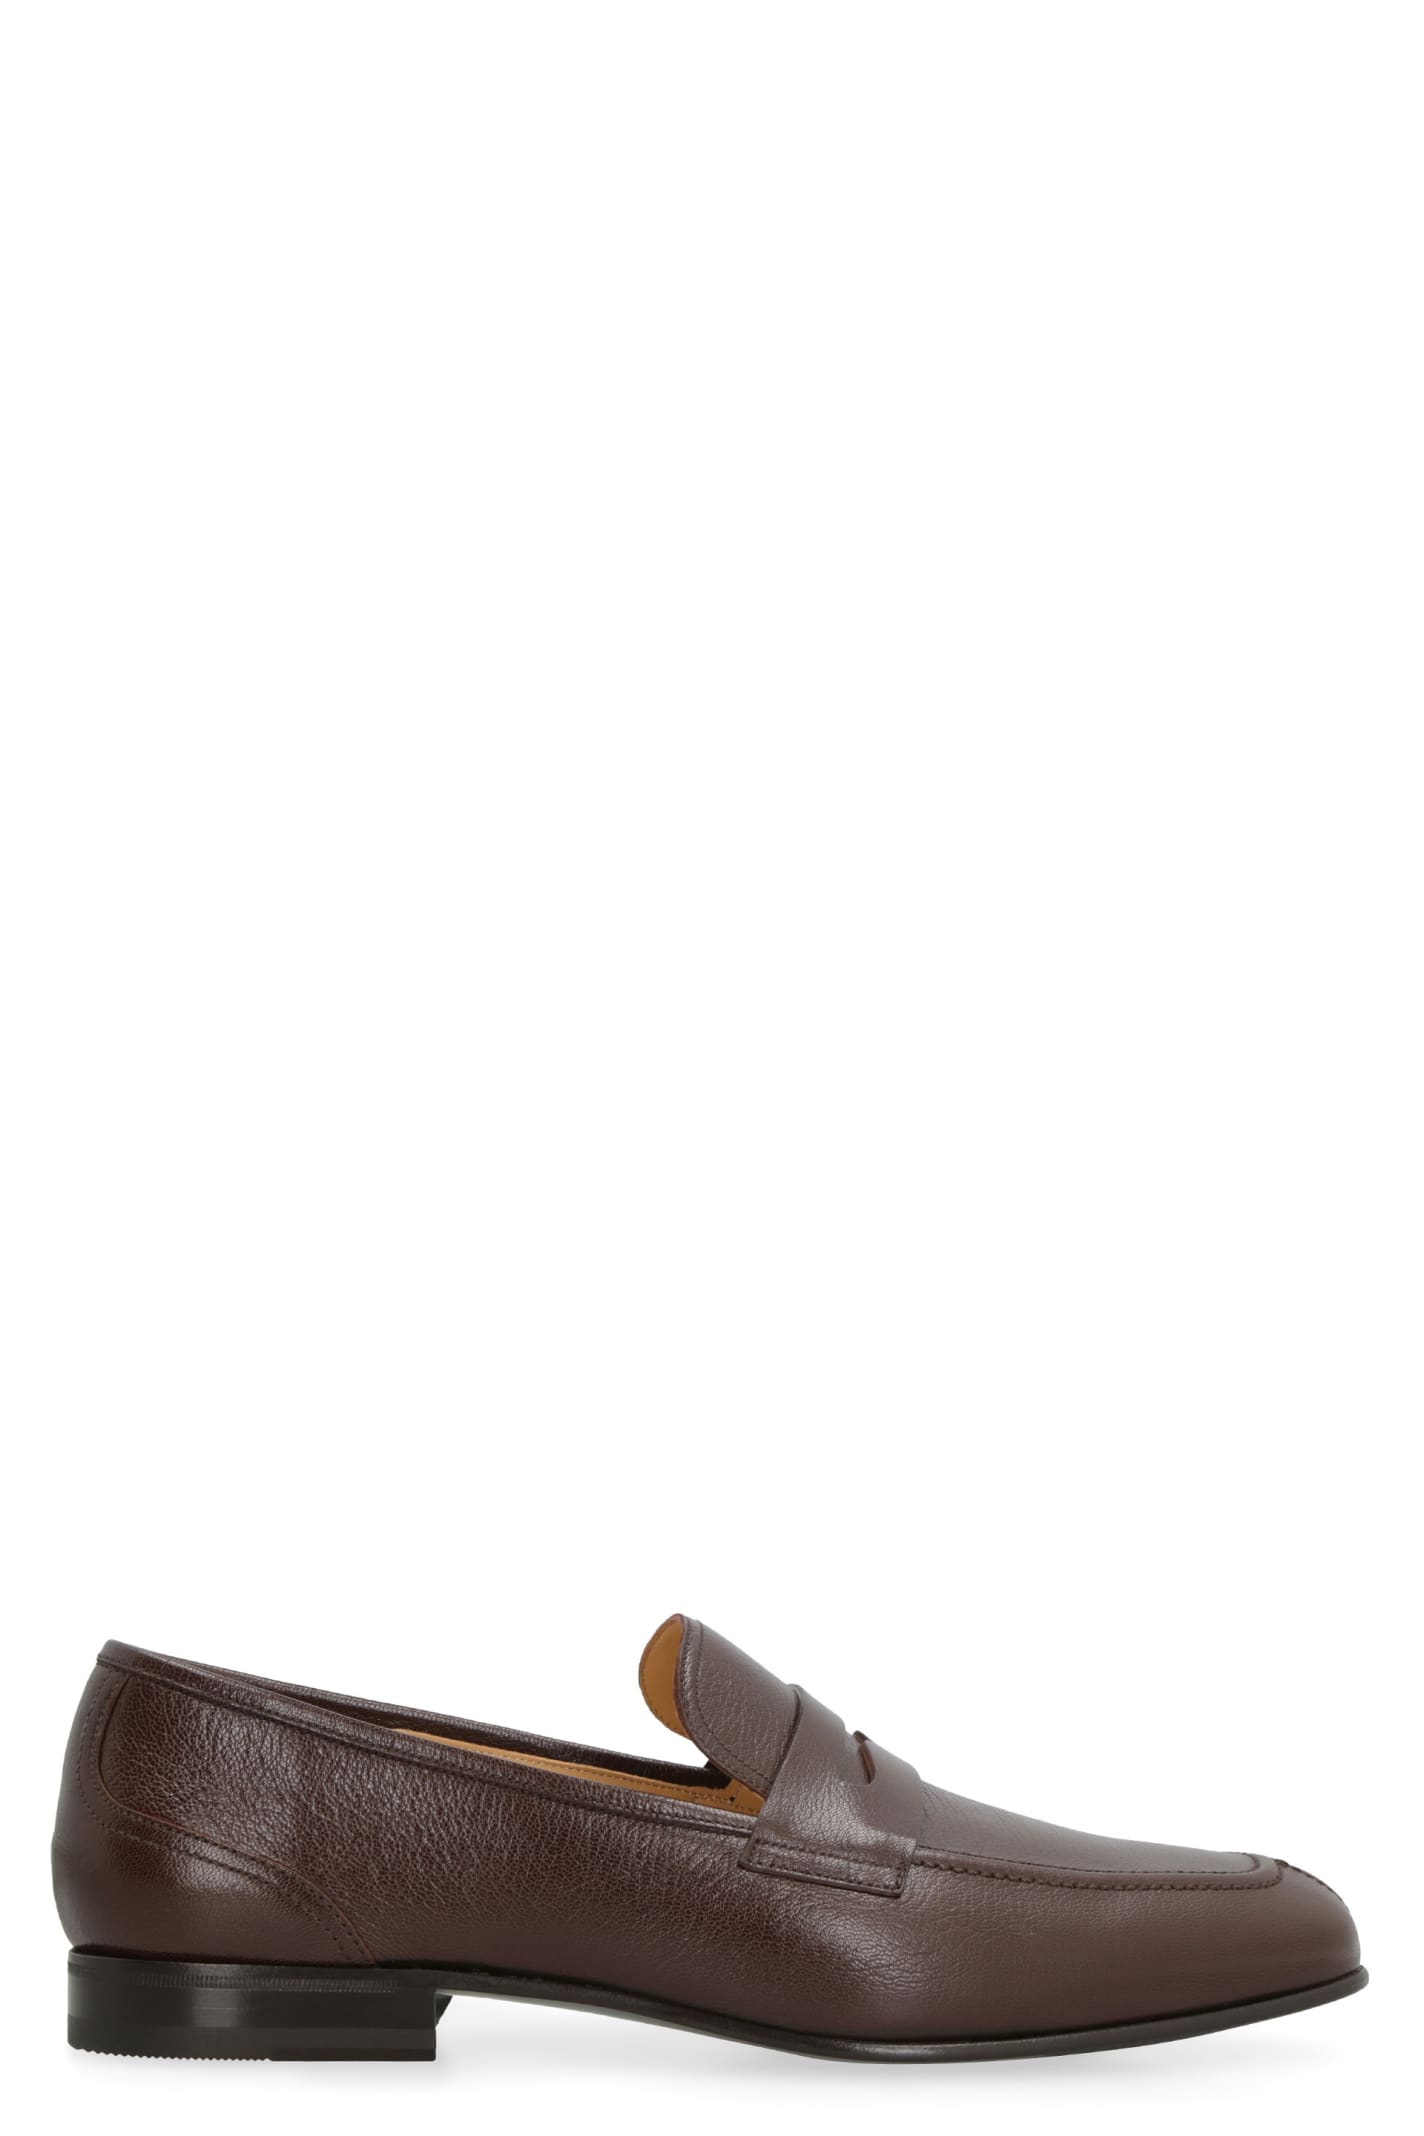 BALLY SAIX LEATHER LOAFERS